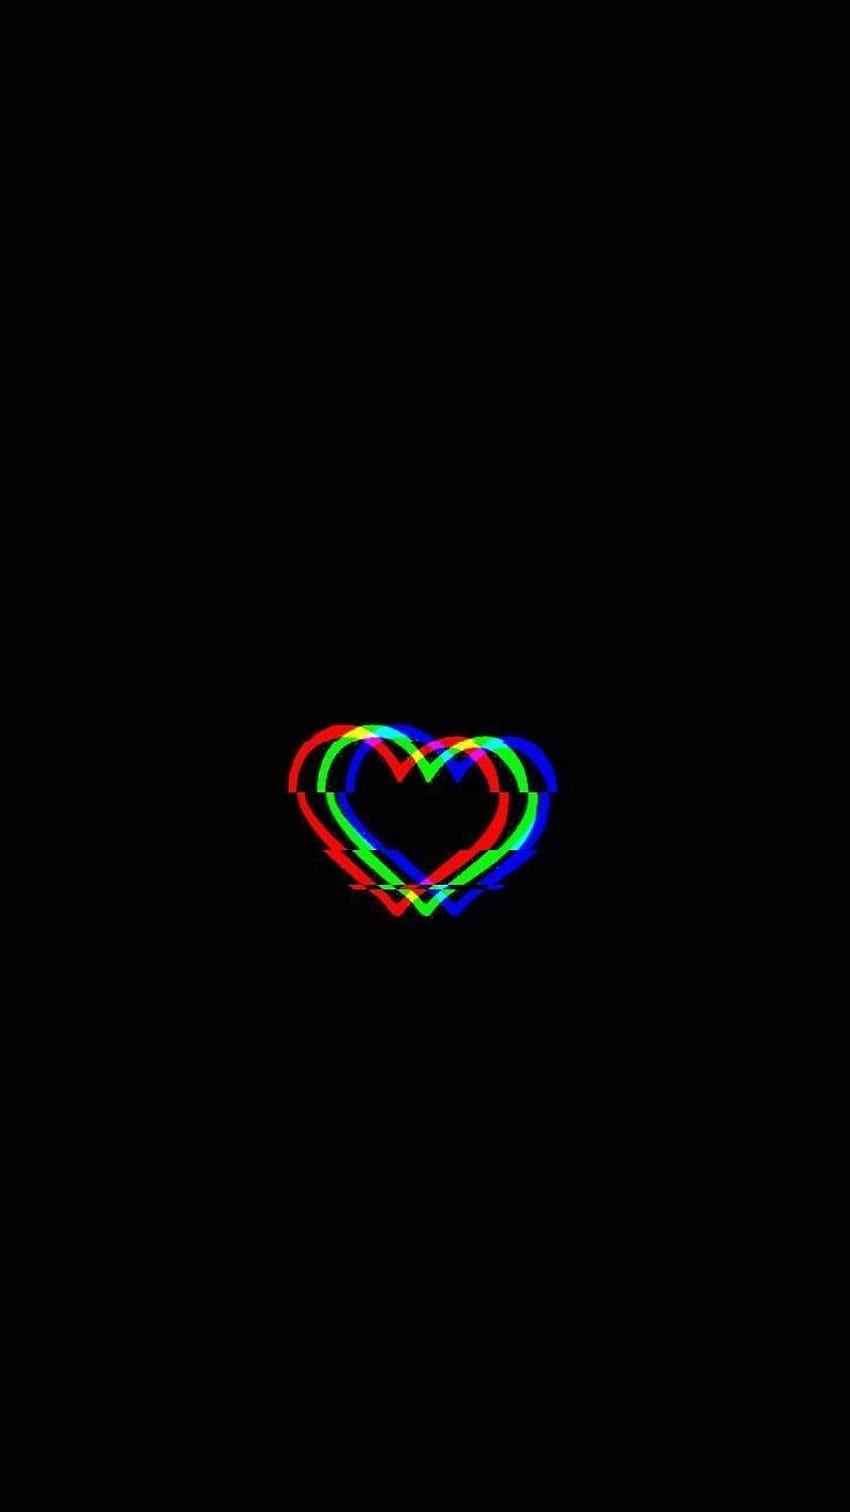 Glitched Heart phone wallpaper